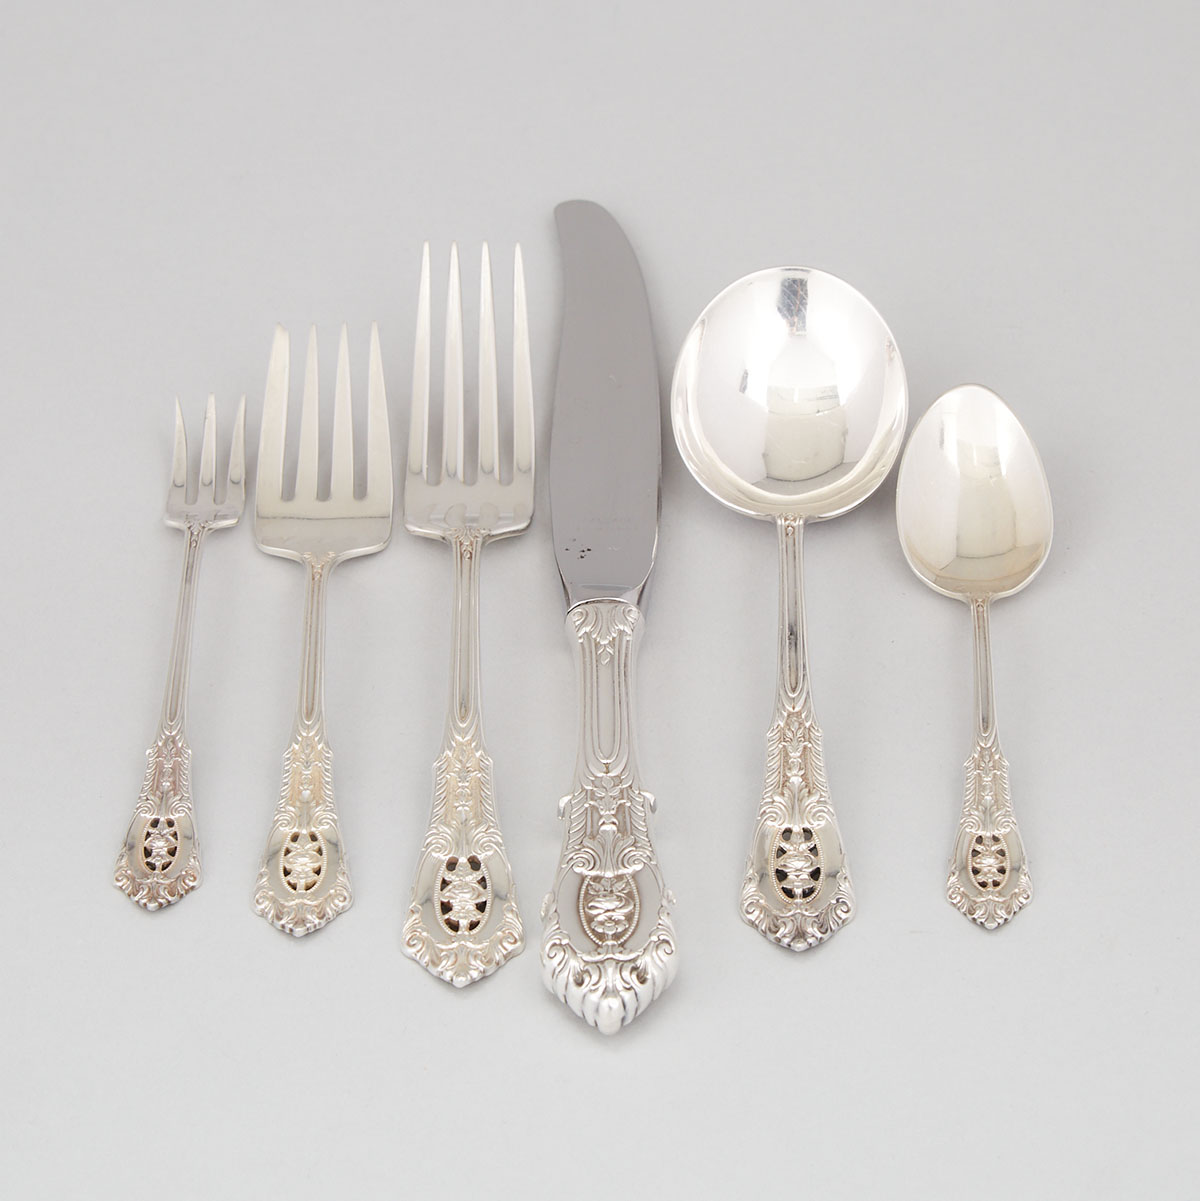 American Silver ‘Rosepoint’ and 'Grande Baroque' Pattern Flatware, Wallace Silversmiths, Wallingford, Ct., 20th century